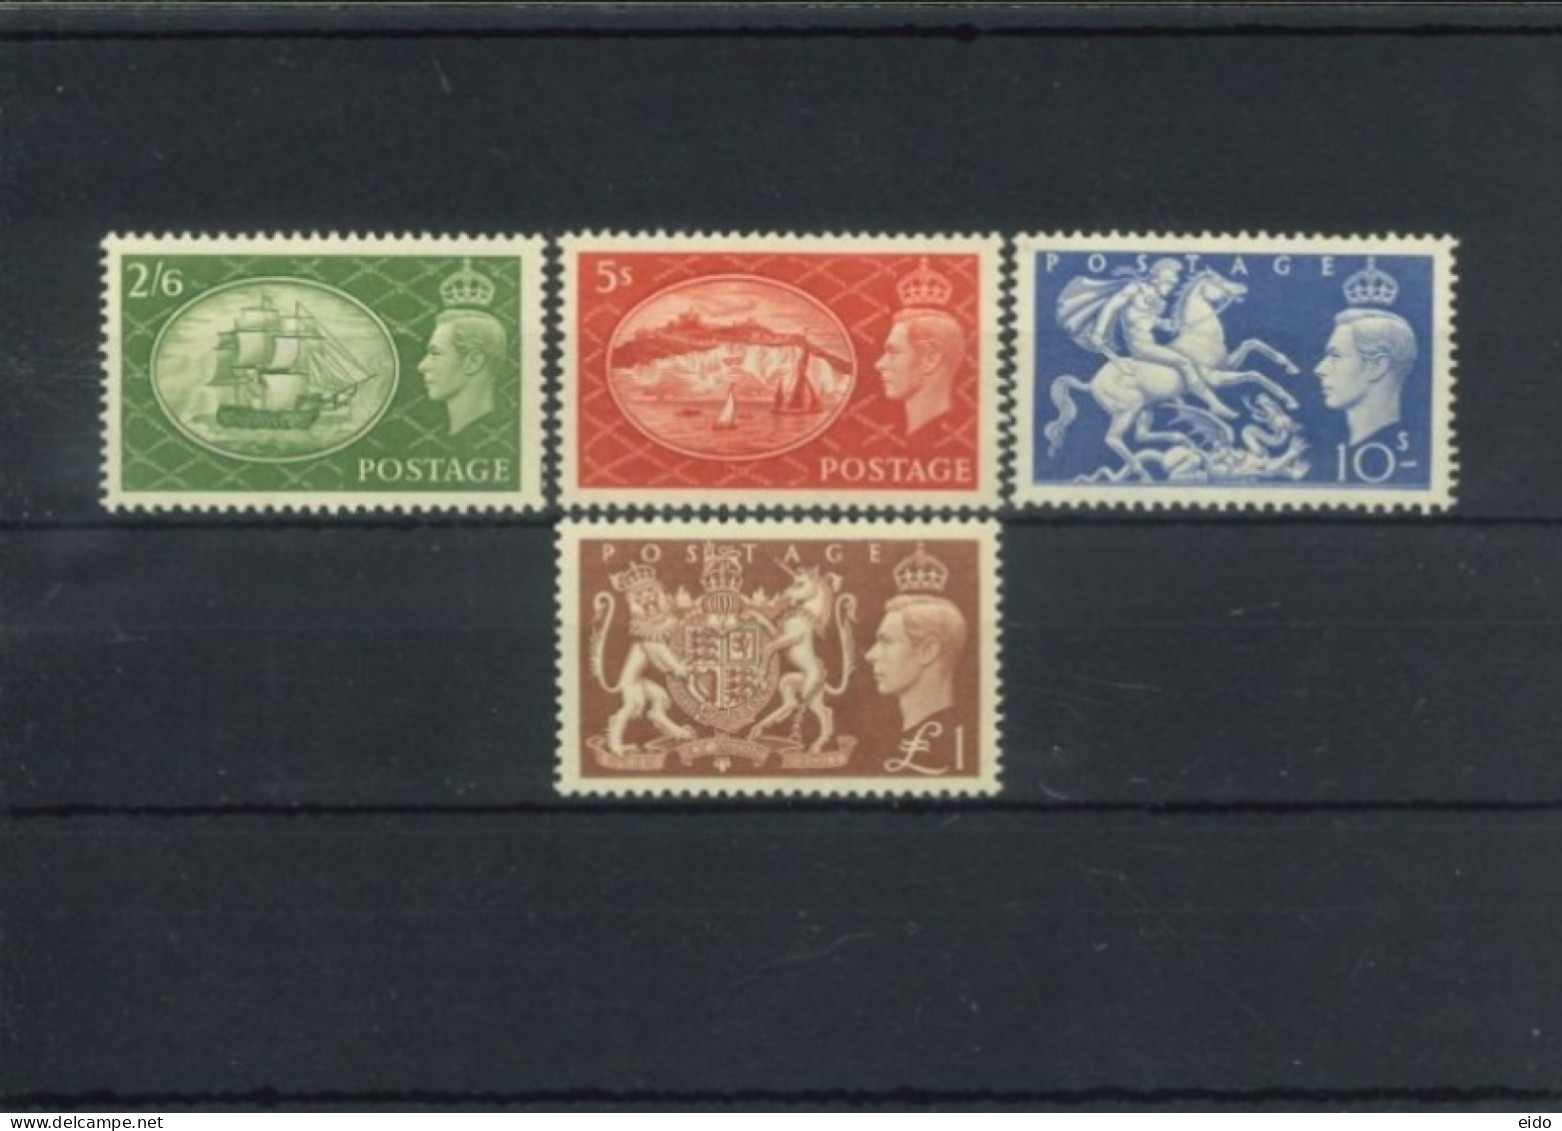 GREAT BRITAIN - 1951 - STAMPS COMPLETE SET OF 4, SG # 509/12, UMM(**). - Universal Mail Stamps